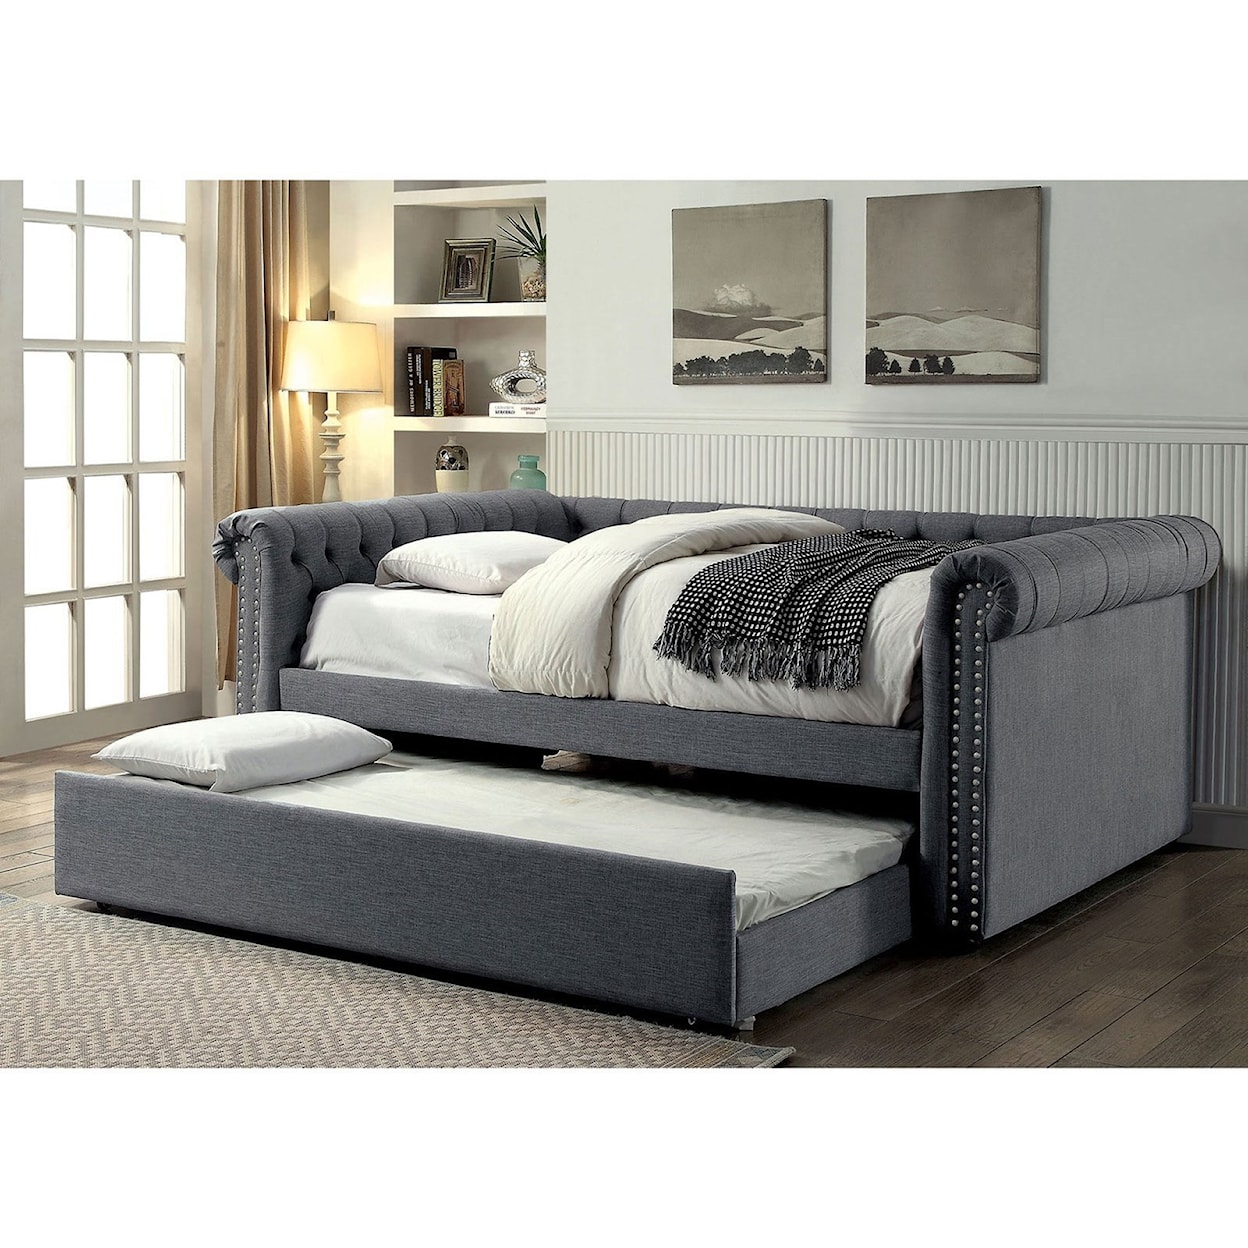 Furniture of America Leanna Full Daybed w/ Trundle